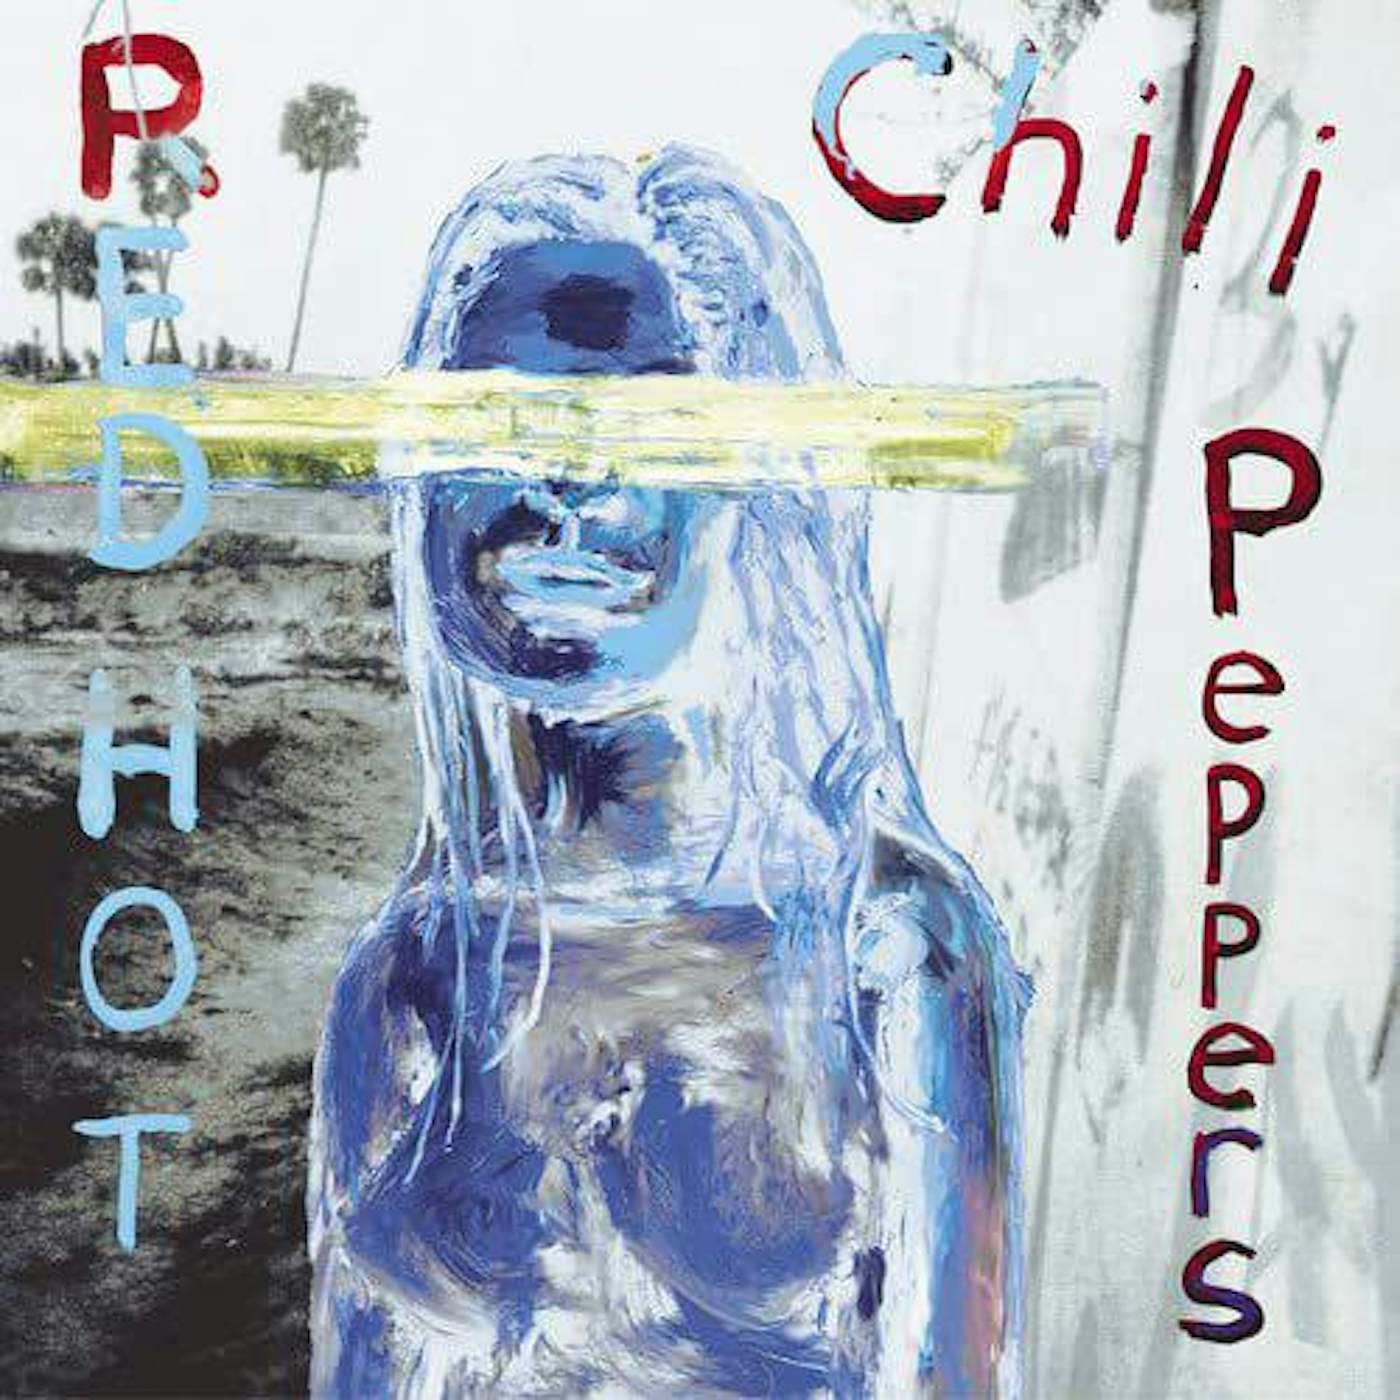 Red Hot Chili Peppers   LP Vinyl Record - By The Way